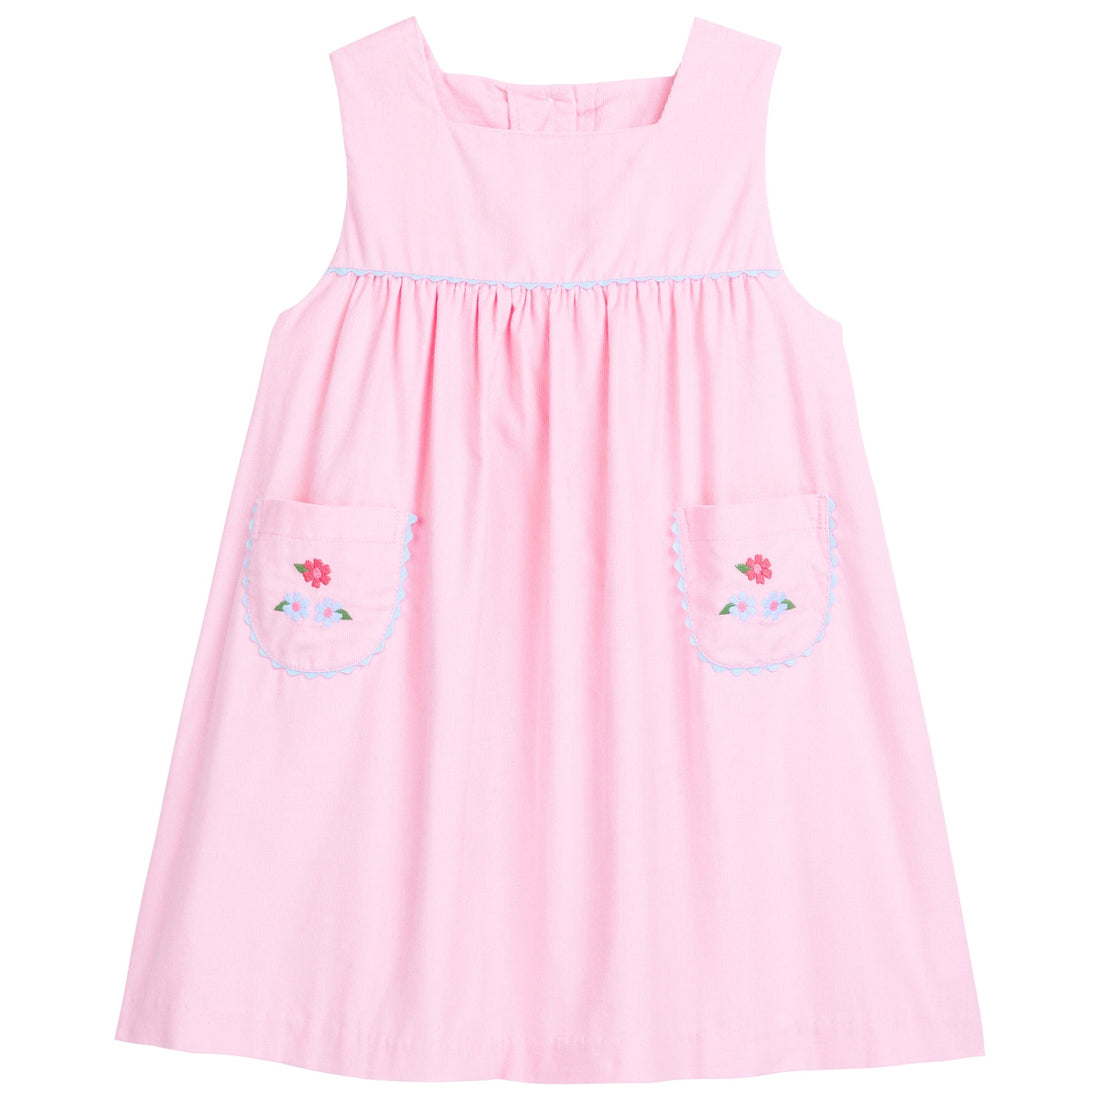 Little English classic childrens clothing toddler girls corduroy pink dress with embroidered flowers on pockets